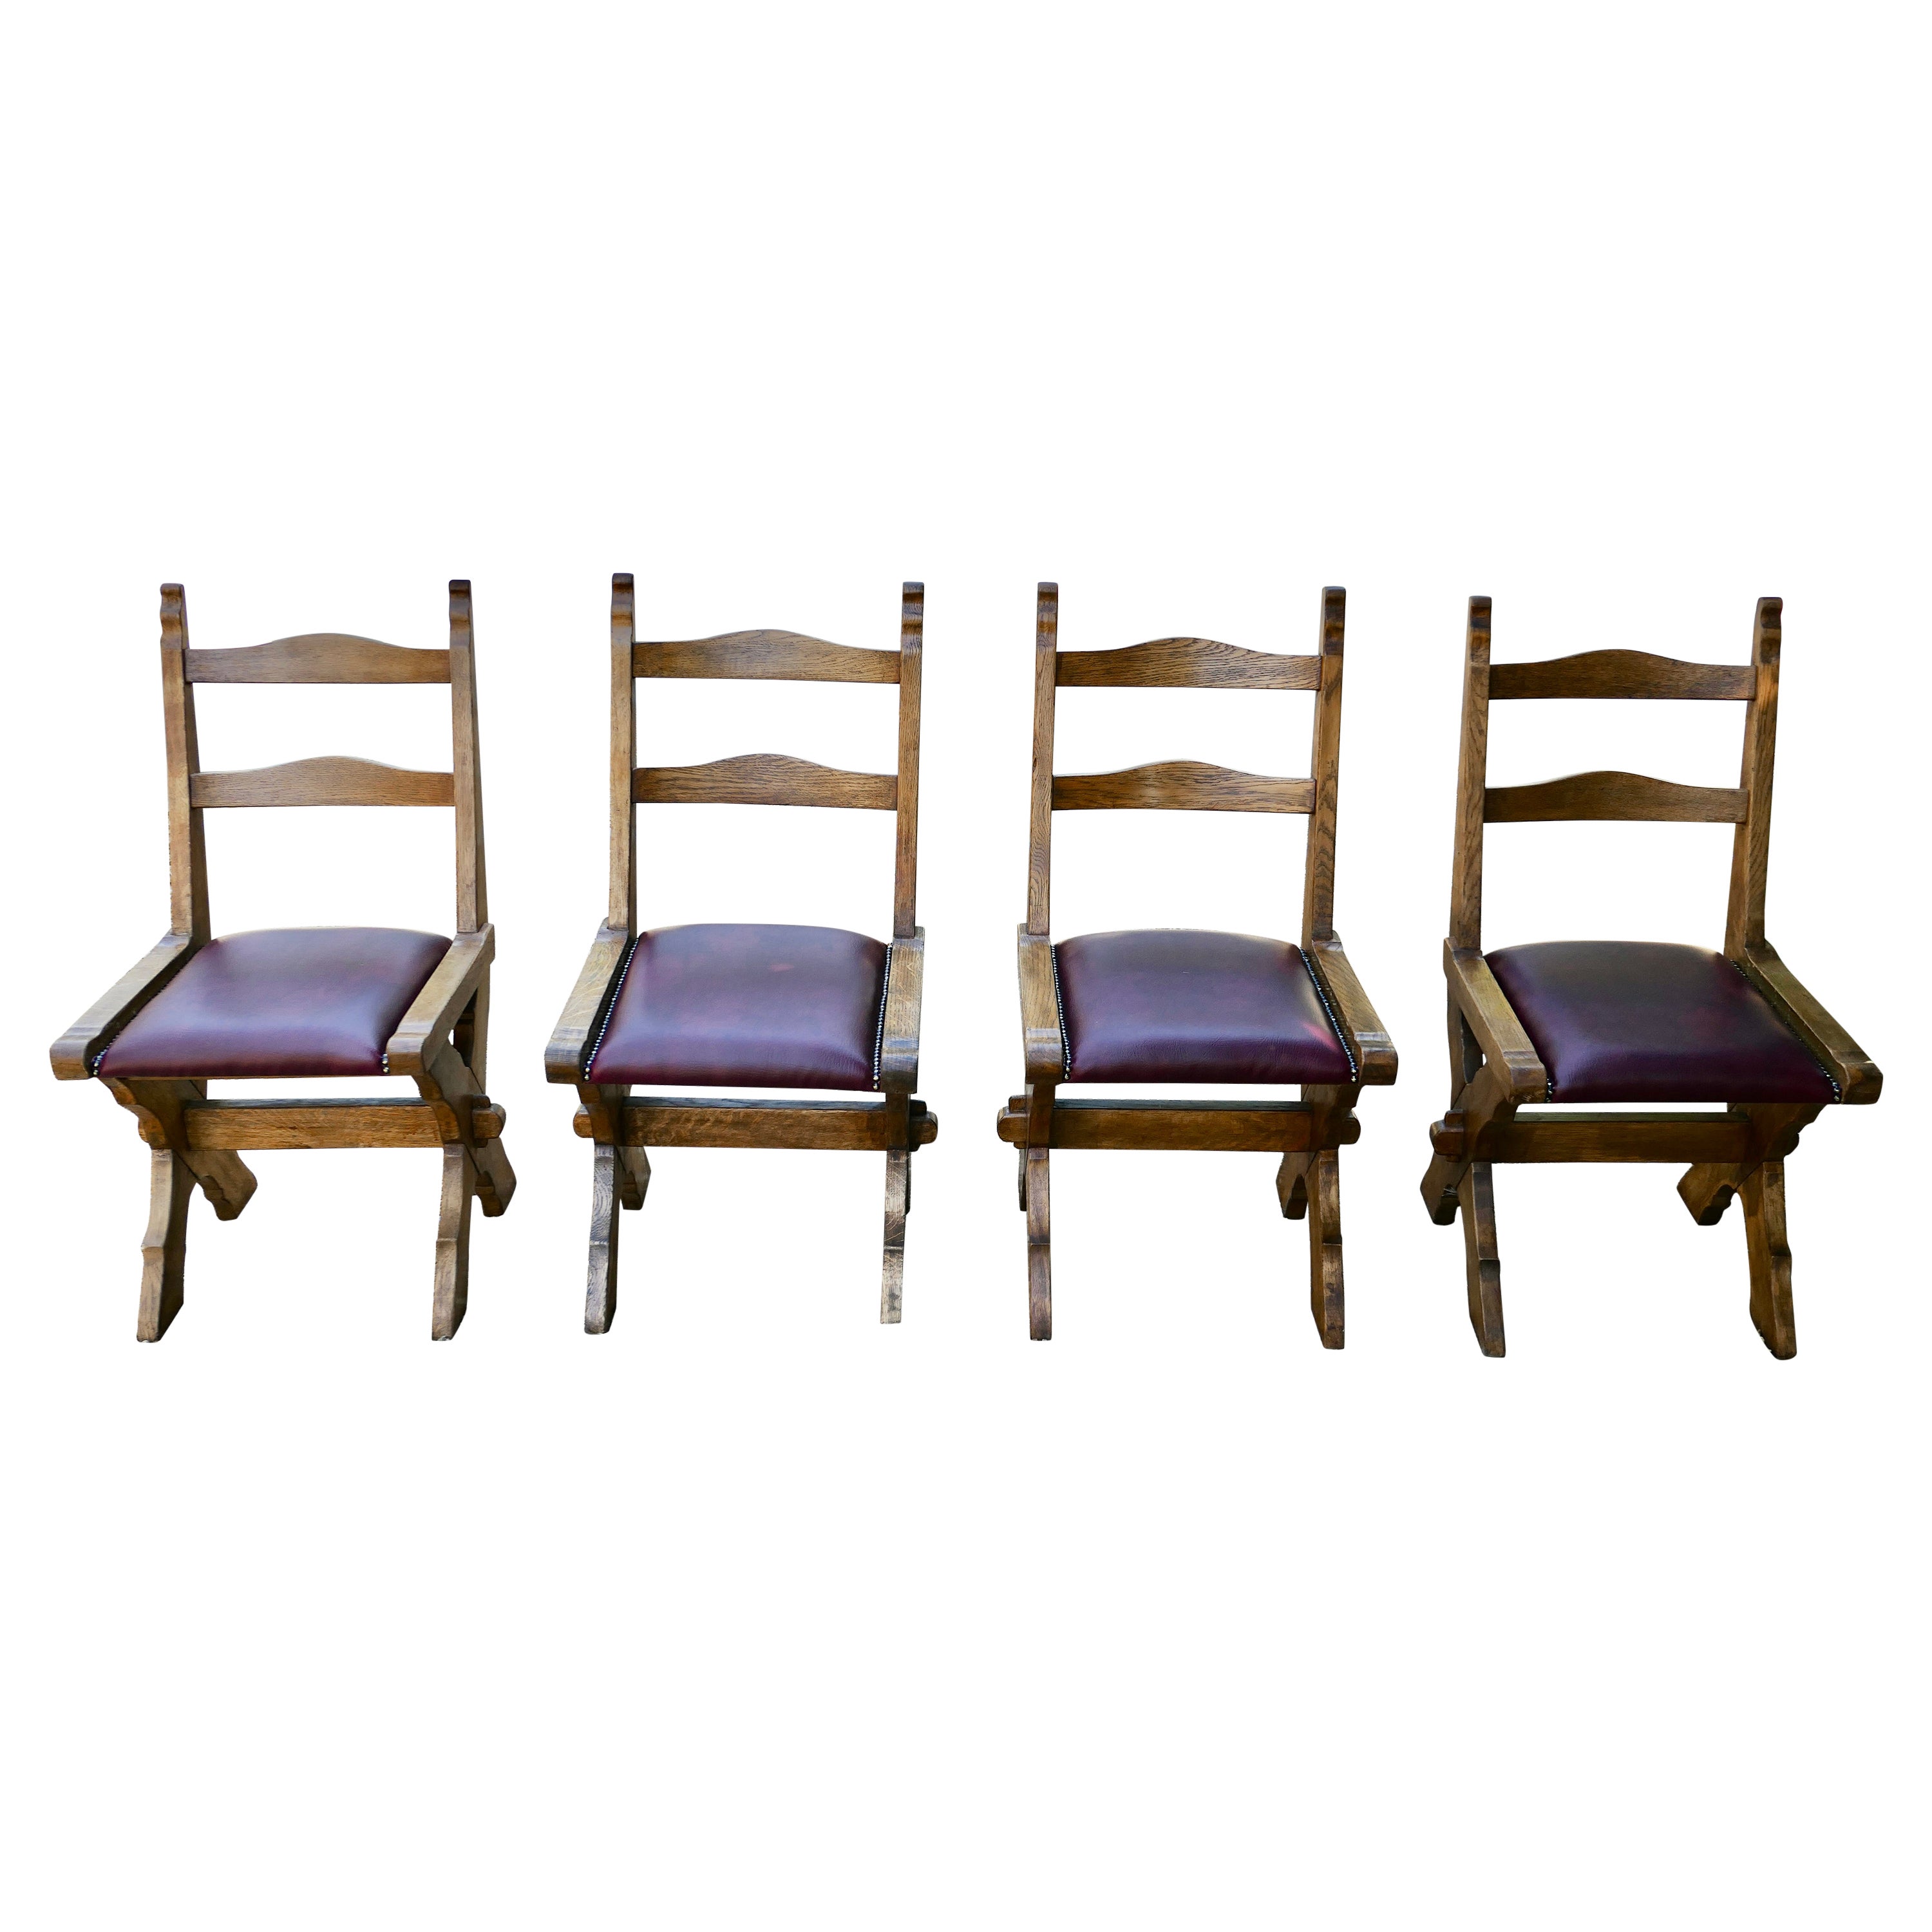 Set of 4 Golden Oak Arts and Crafts X Frame Refectory Dining Chairs